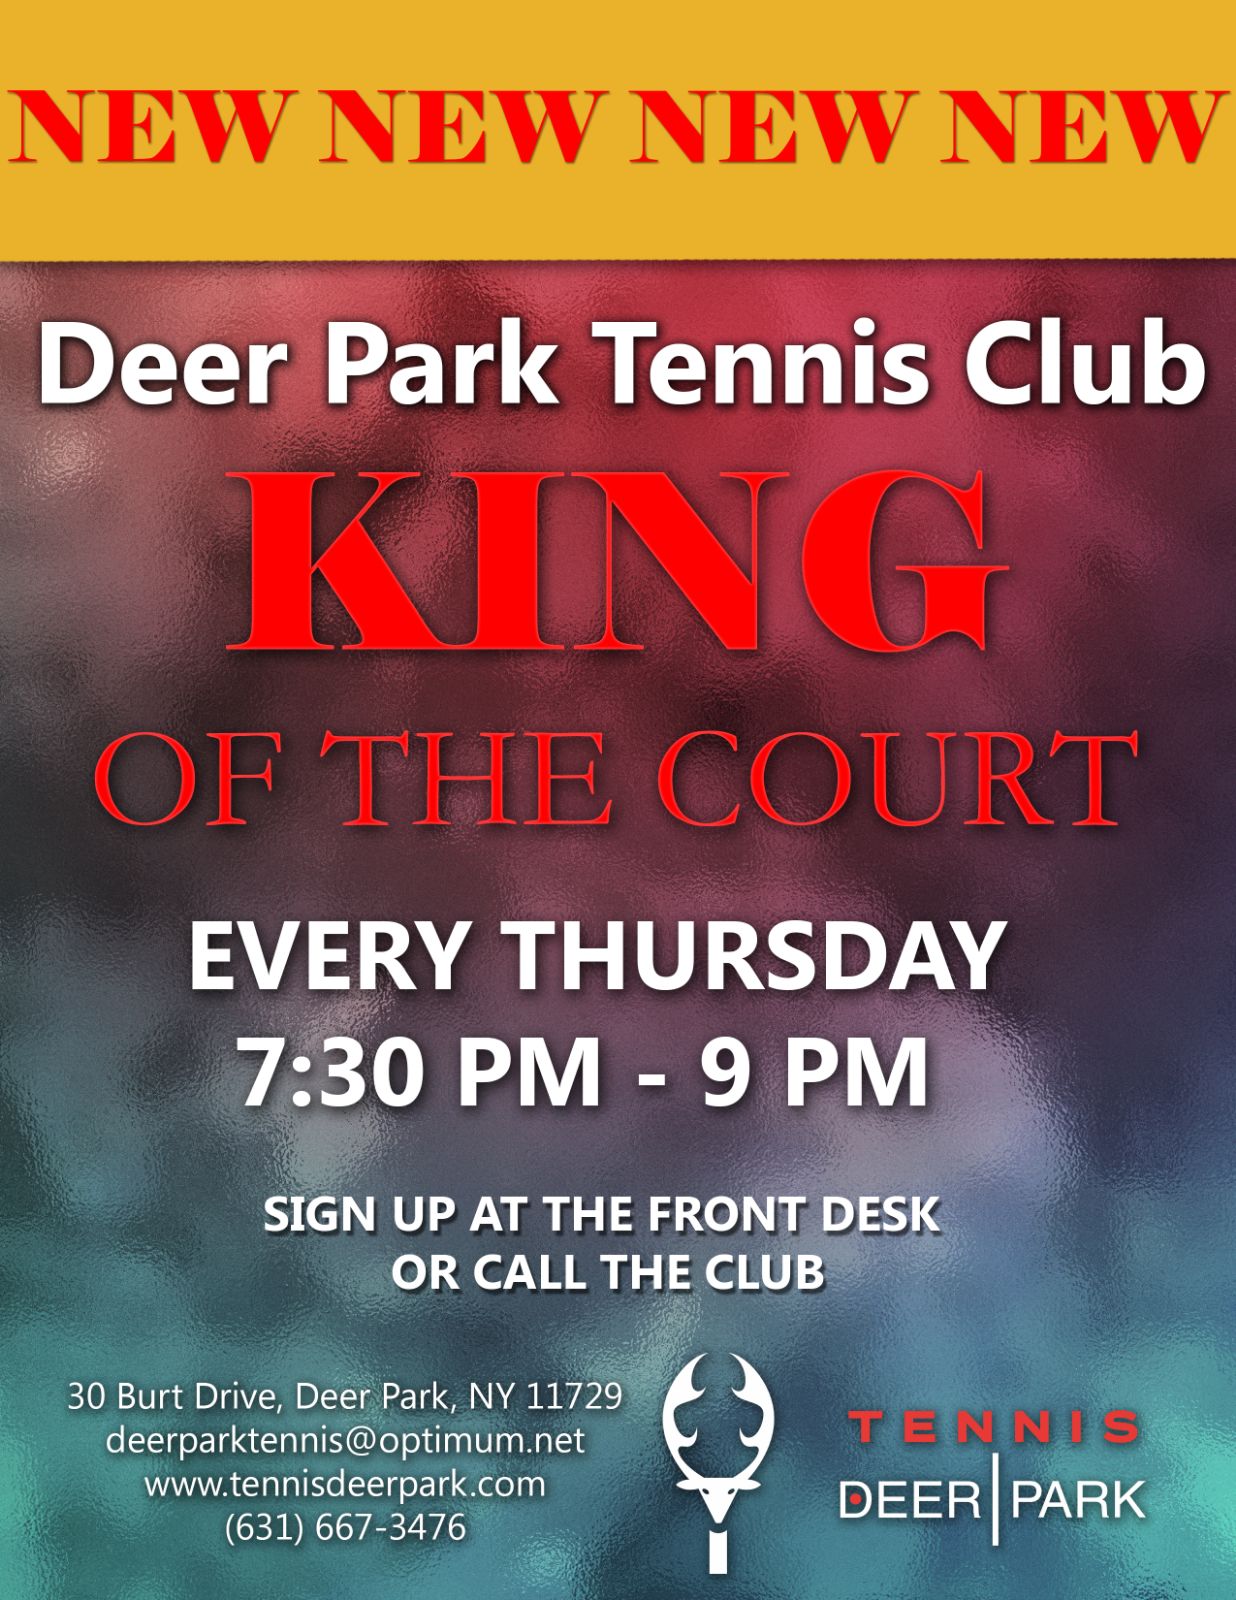 King of the court!